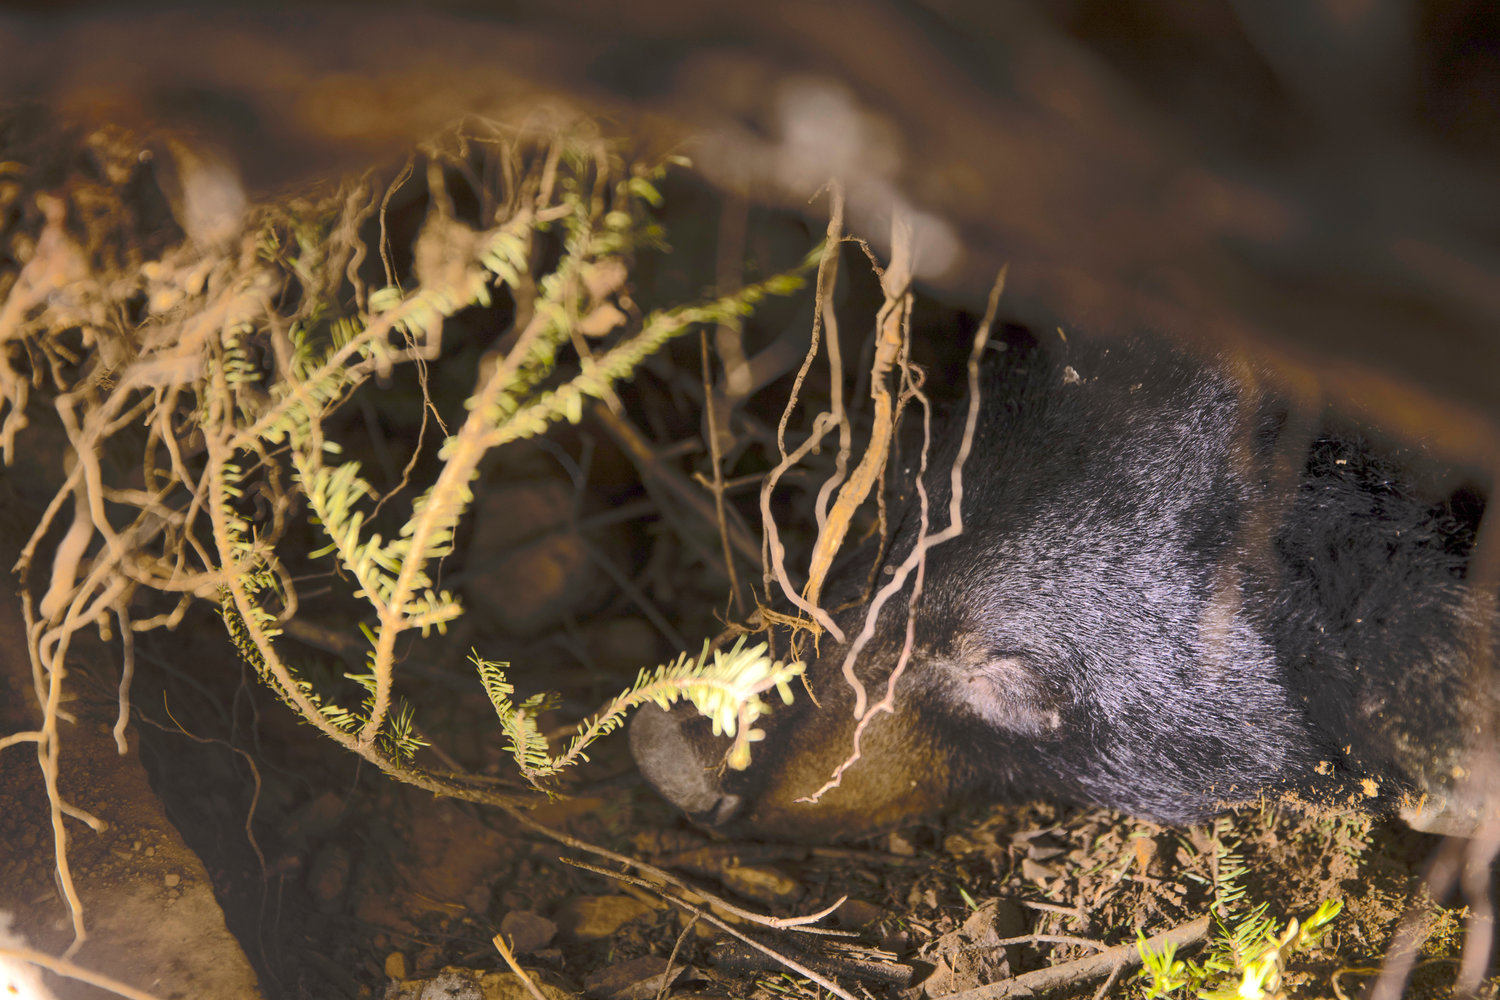 HIBERNATING — A bear hibernates in a den in Grand Portage, Minn. on March 2. Biologists from the Grand Portage Band of Lake Superior Chippewa are tracking the animals and taking biological samples, including a COVID-19 swab, from bears and other mammals for research.